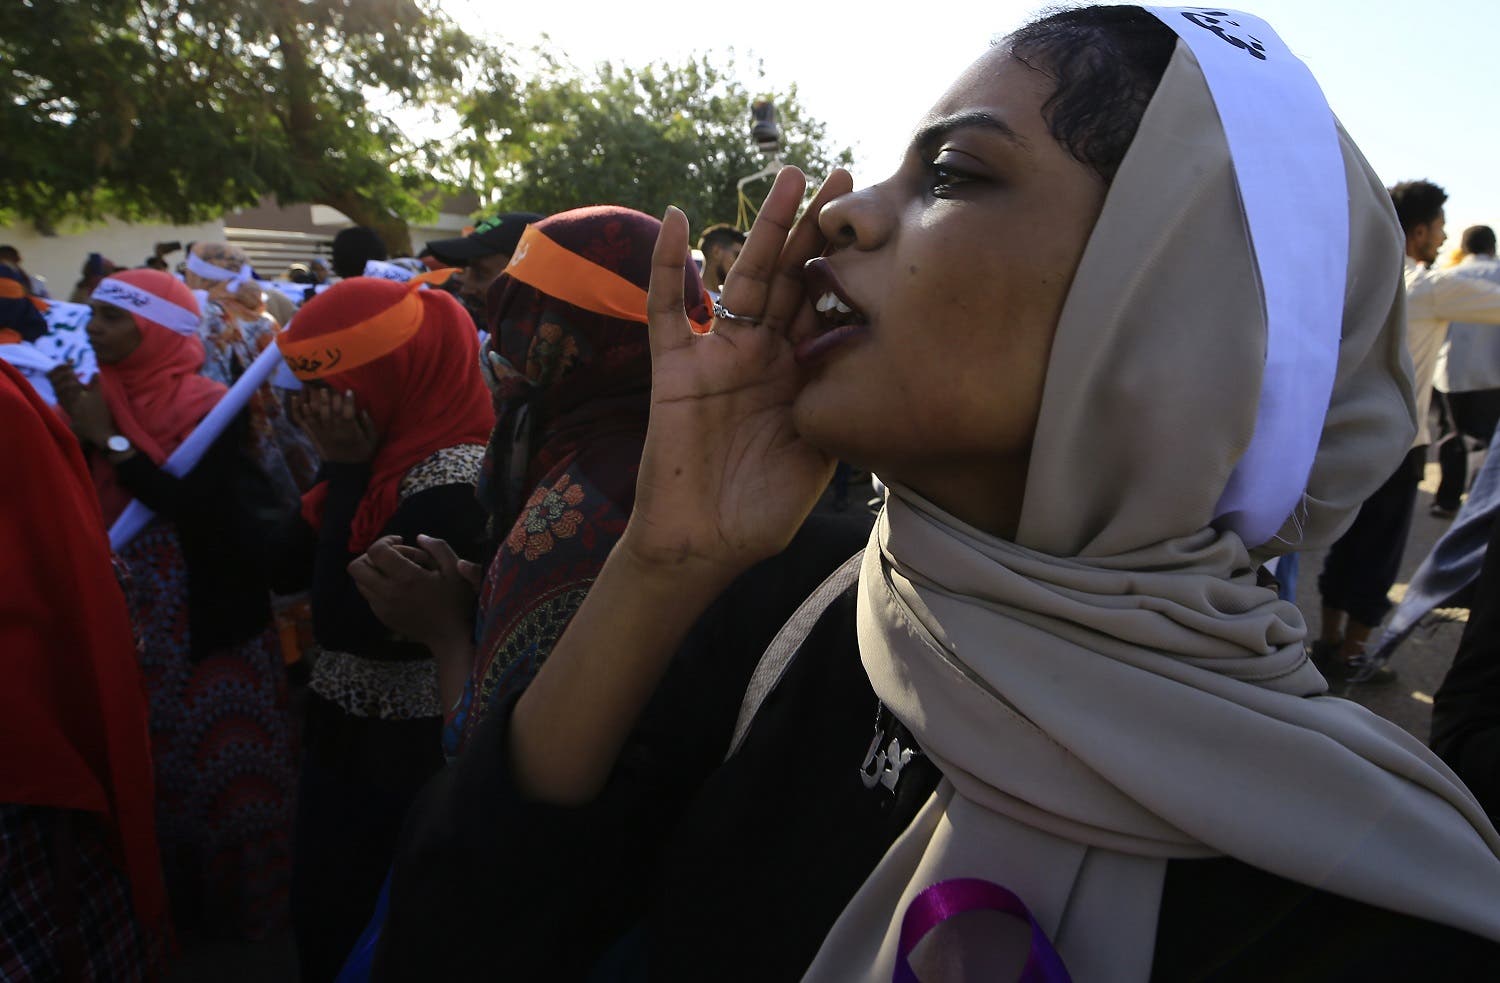 Sudanese women march in Khartoum to mark International Day for Eliminating Violence against Women. (AFP)